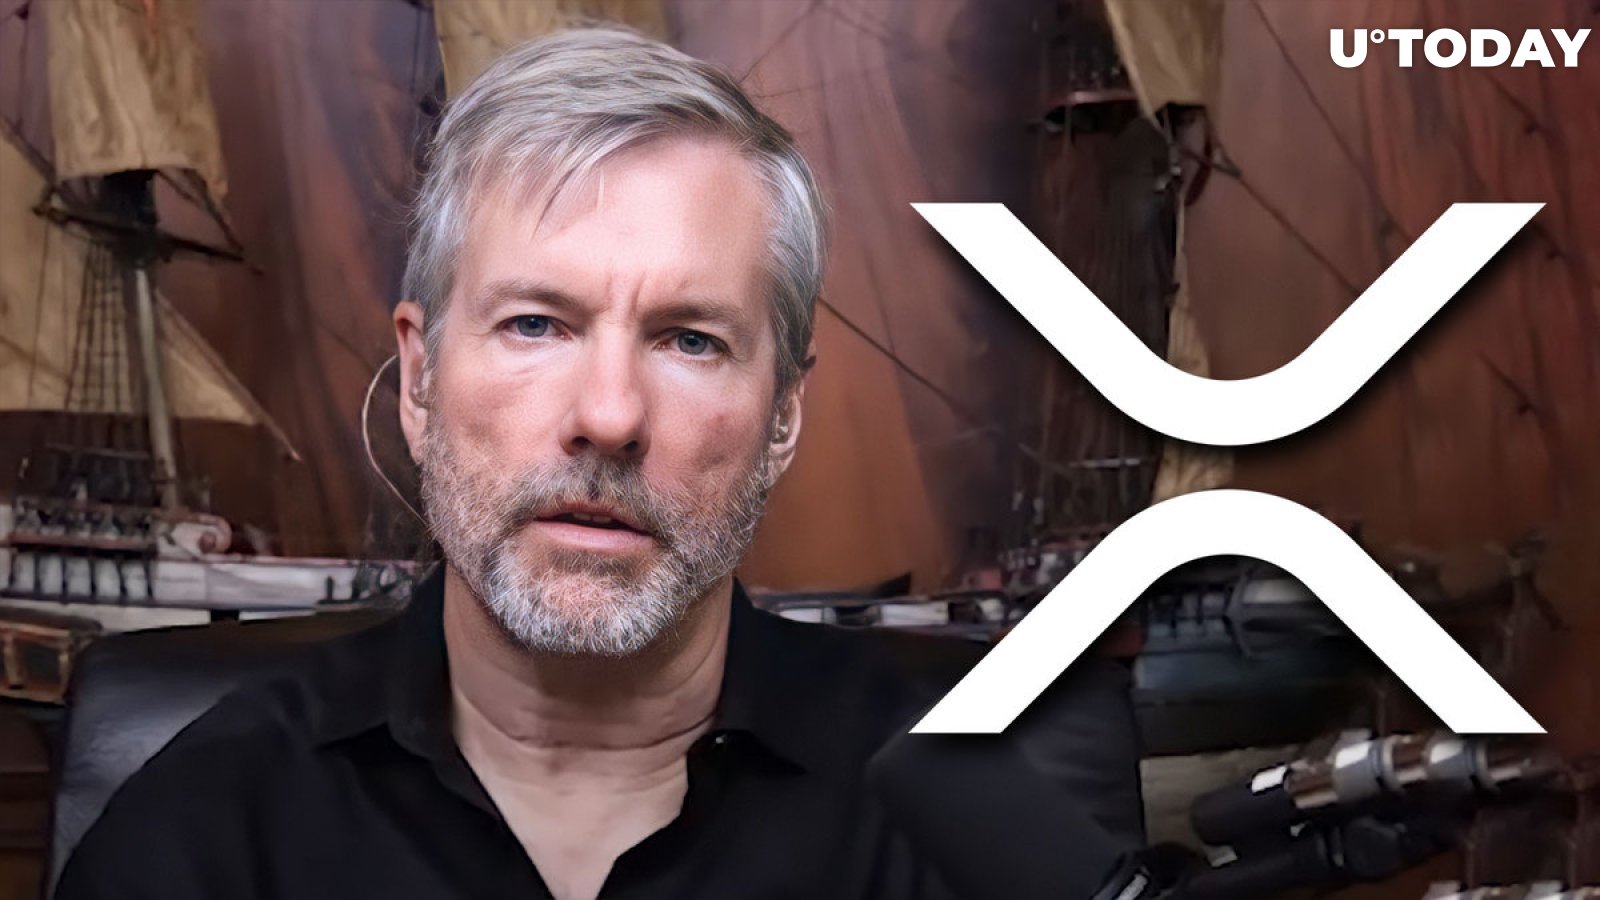 XRP Community Reacts to Michael Saylor's Comments on Ripple Lawsuit